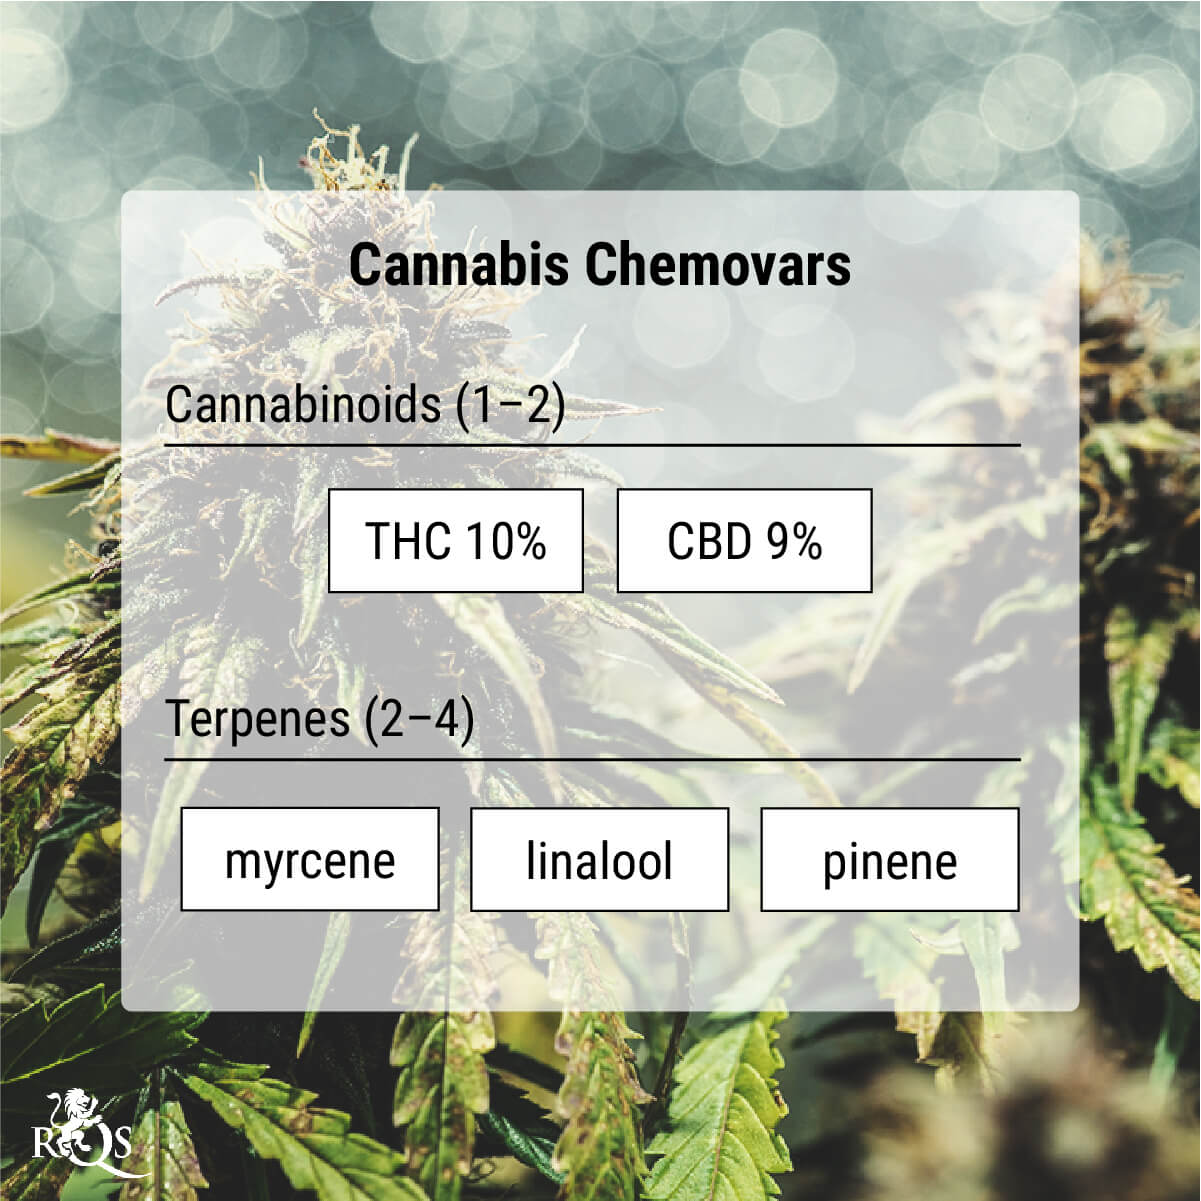 Cannabis Chemovars: A More Accurate Means of Classification